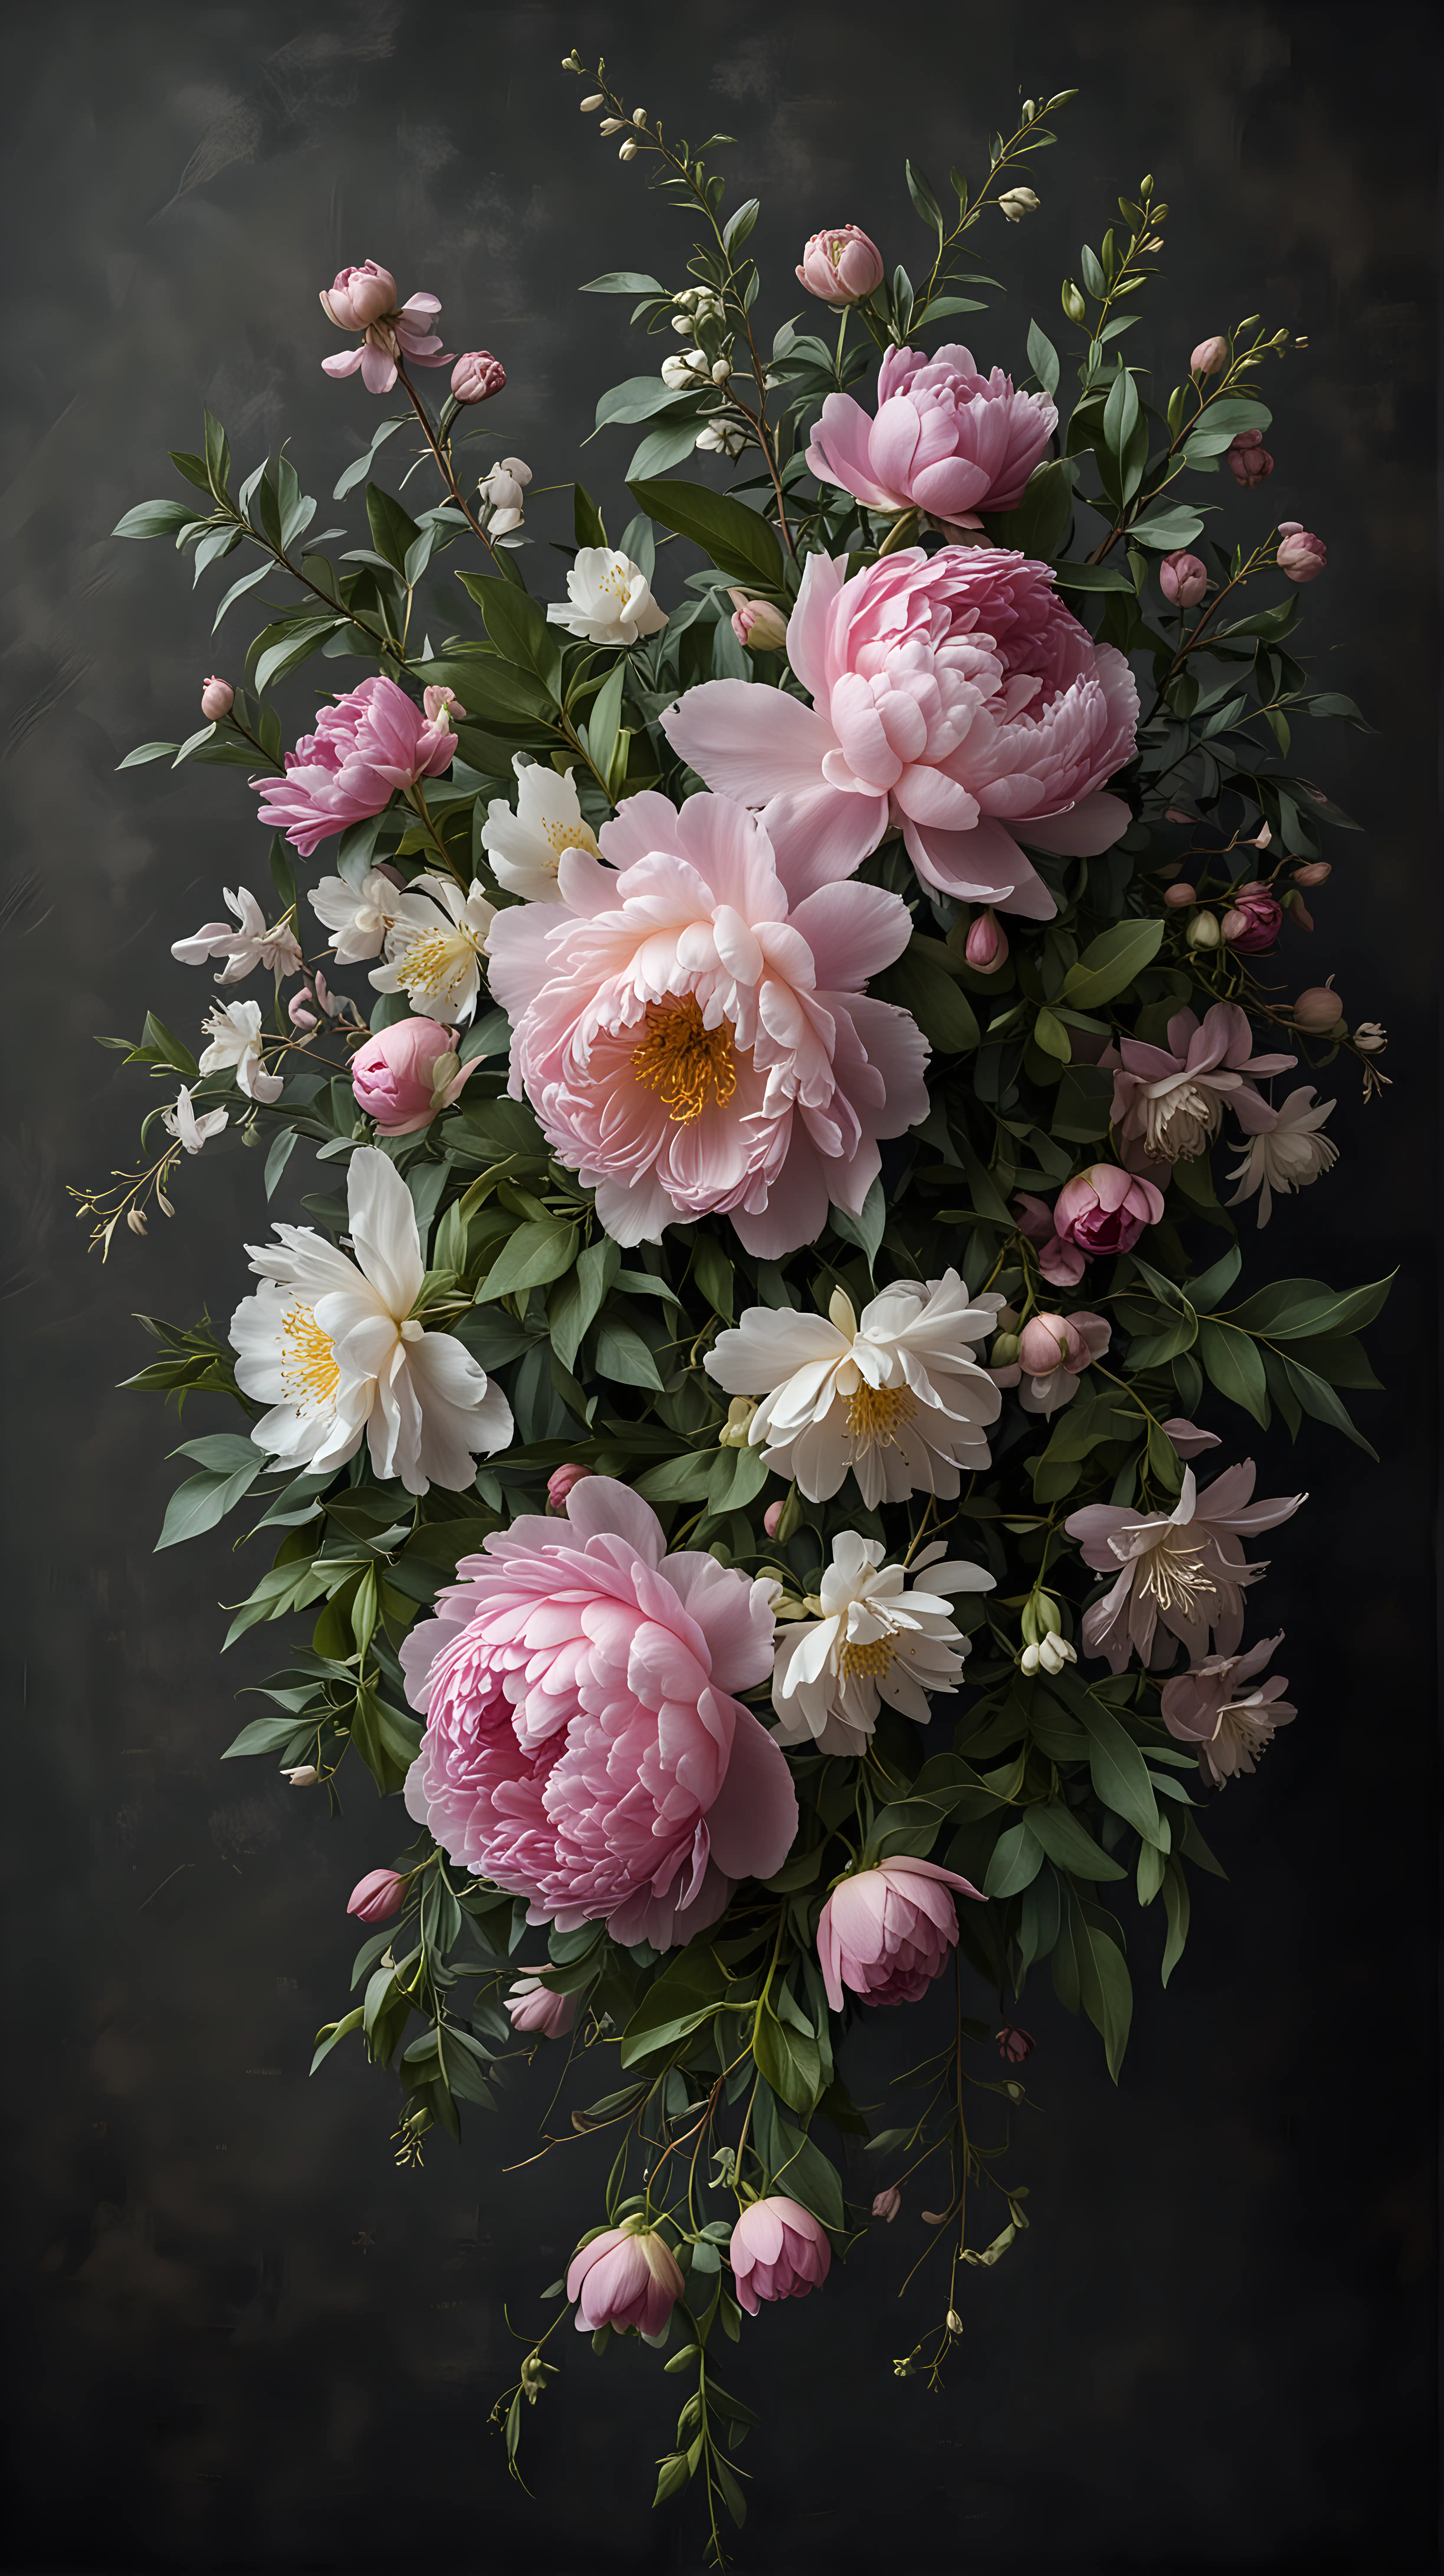 dark Moody artwork of a trailing floral arrangement in various shades of soft pink, peonies, renunculus, trailing down the side of the image with soft white star jasmine. and sweet peas, Dark shadows, Dark grey background, muted colours,  in the style of old dutch masters
